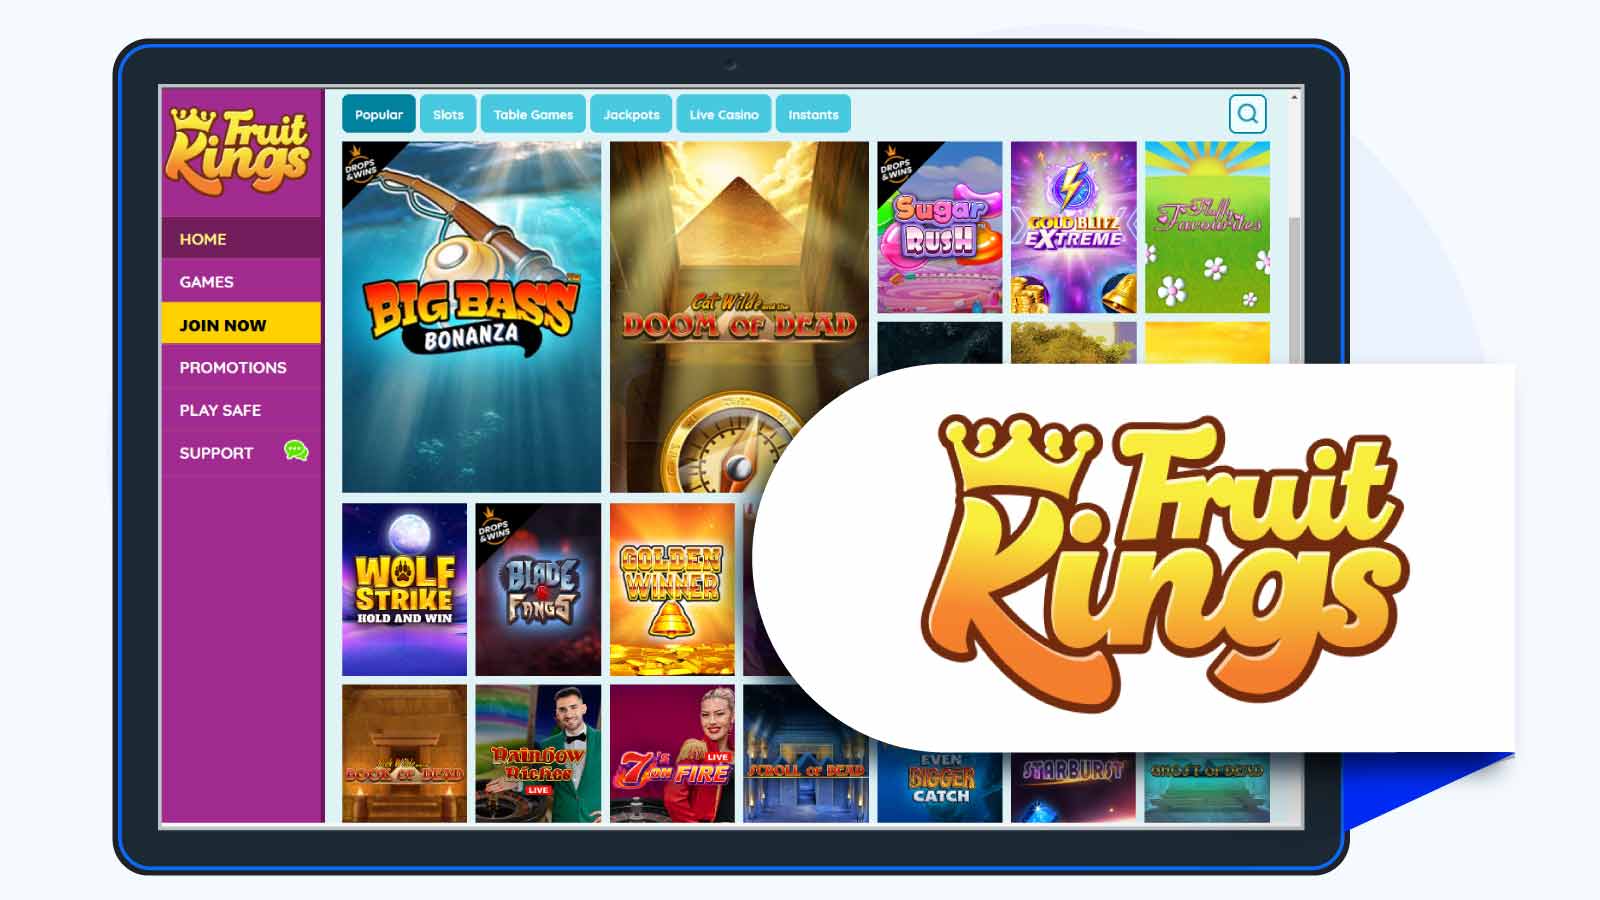 FruitKings Casino – Skrill Casino of the Month